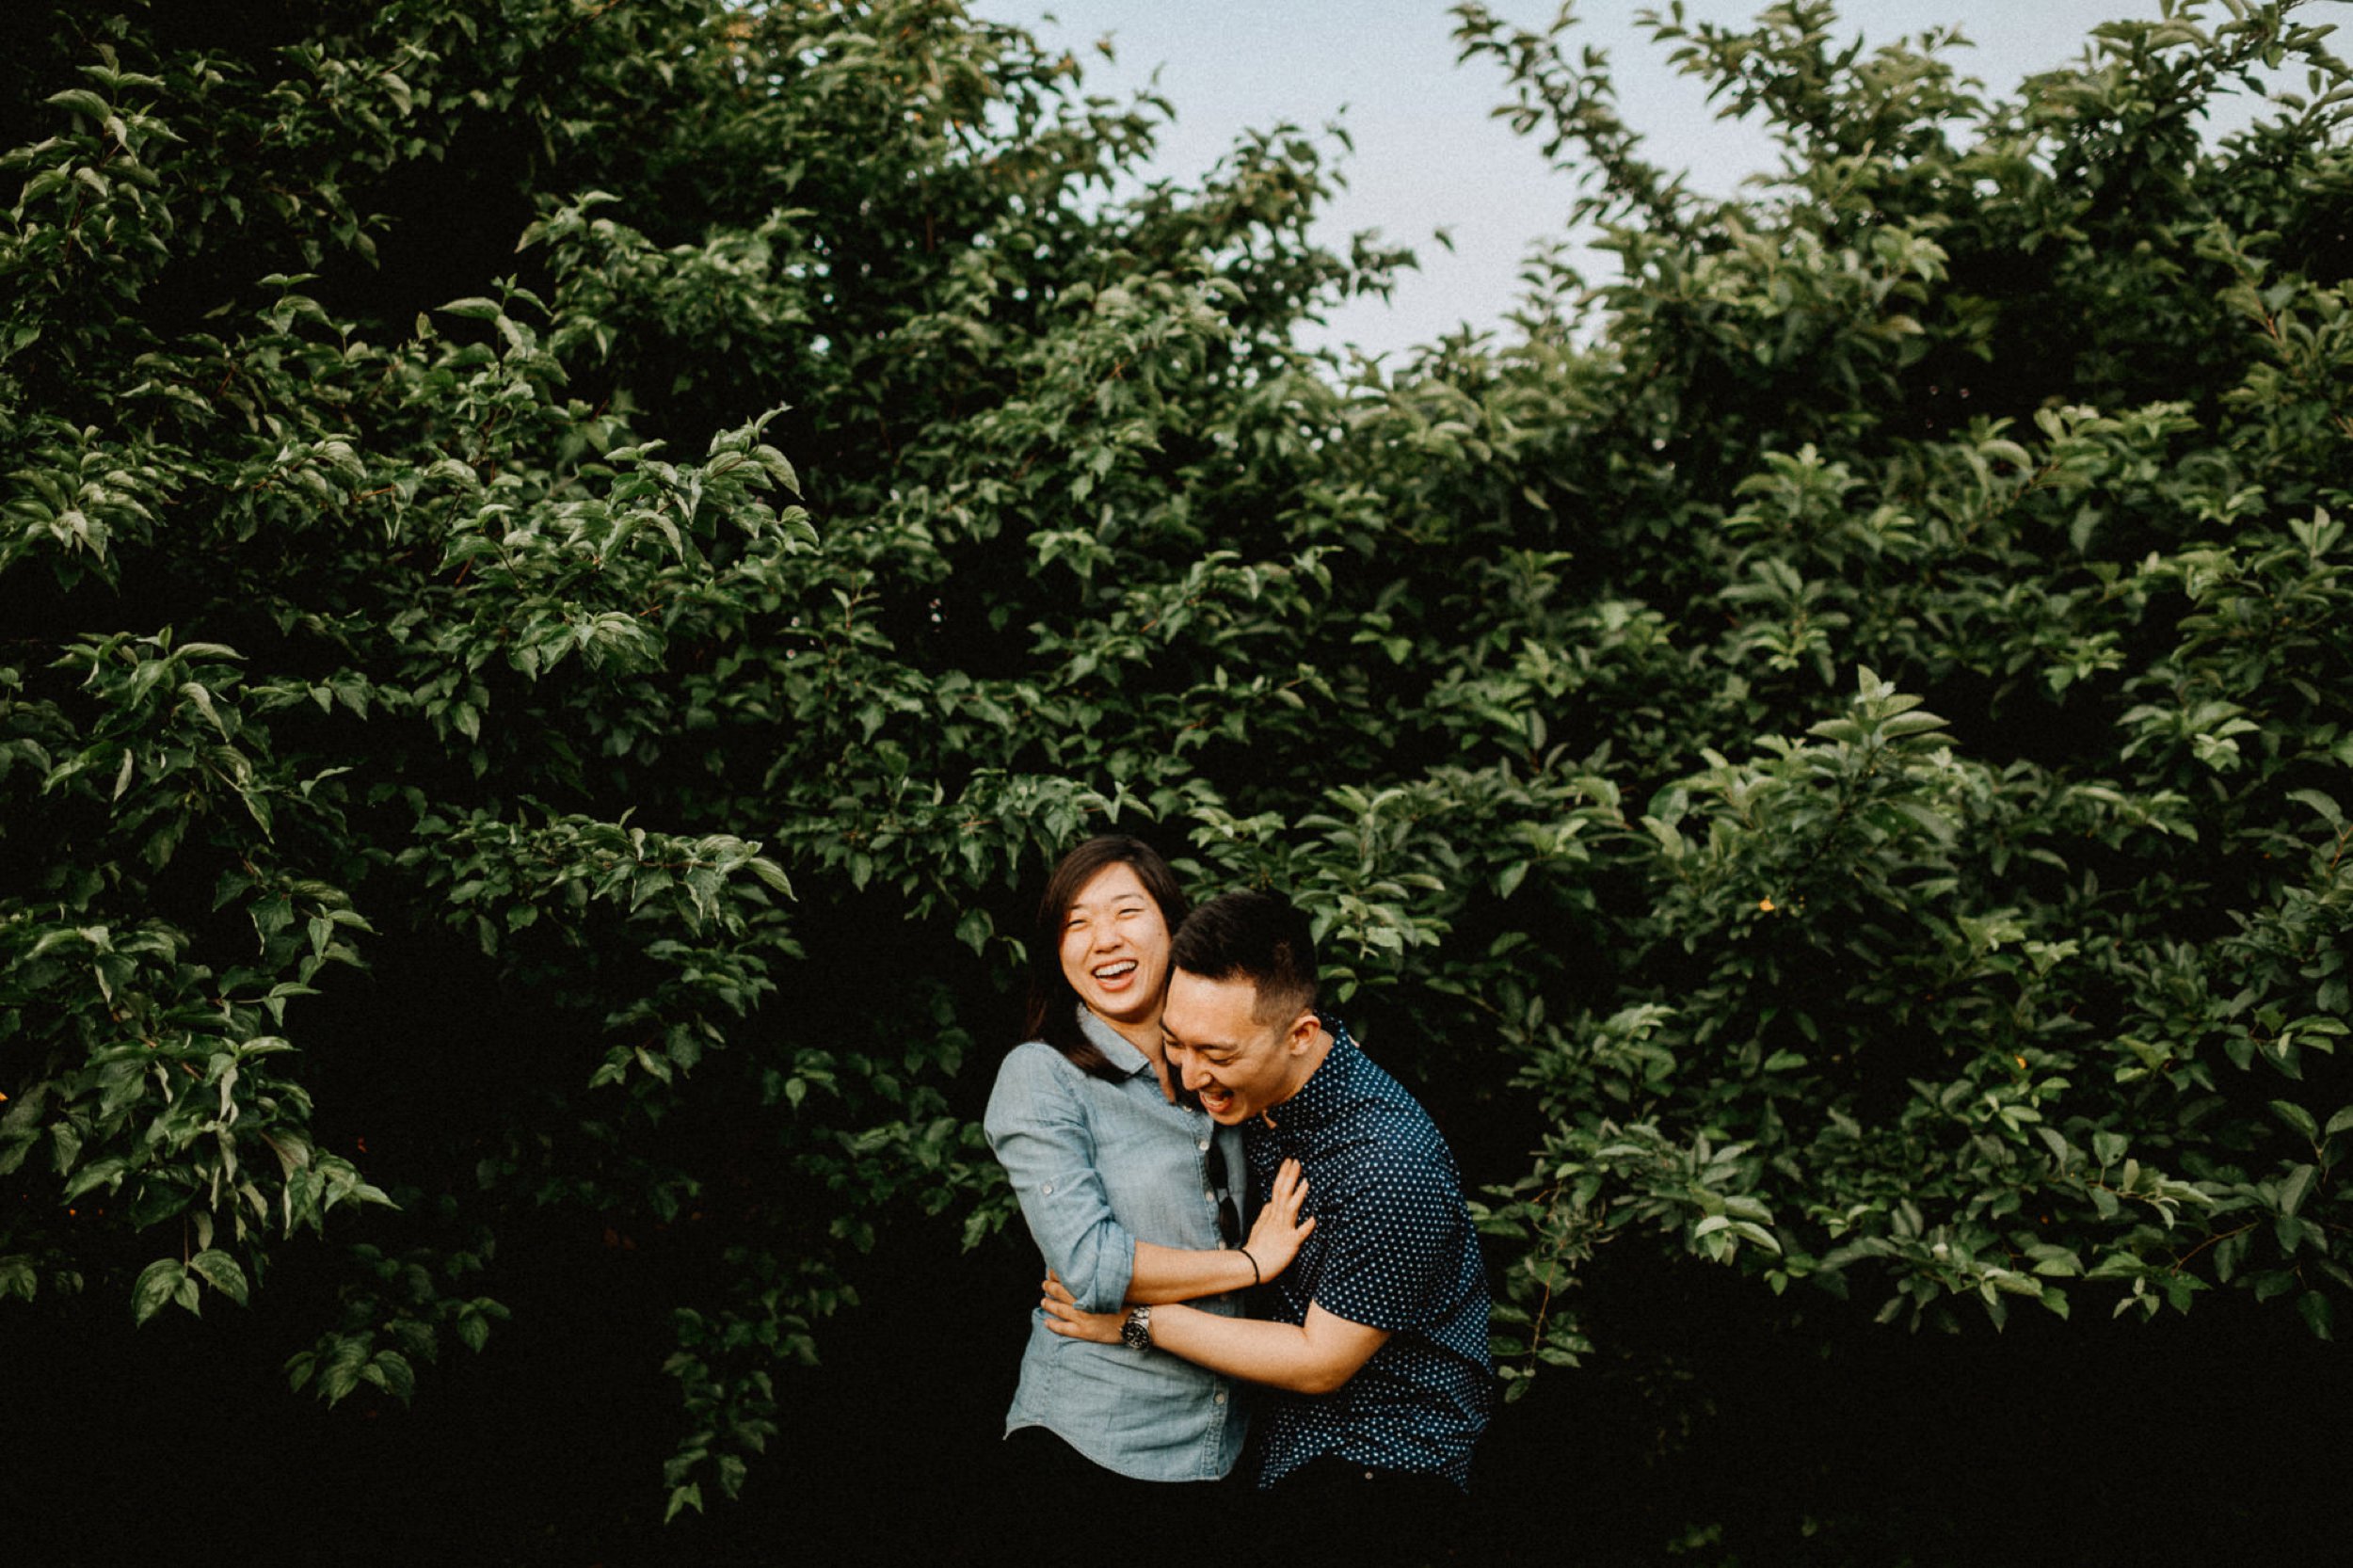 philly_engagement_session-17.jpg